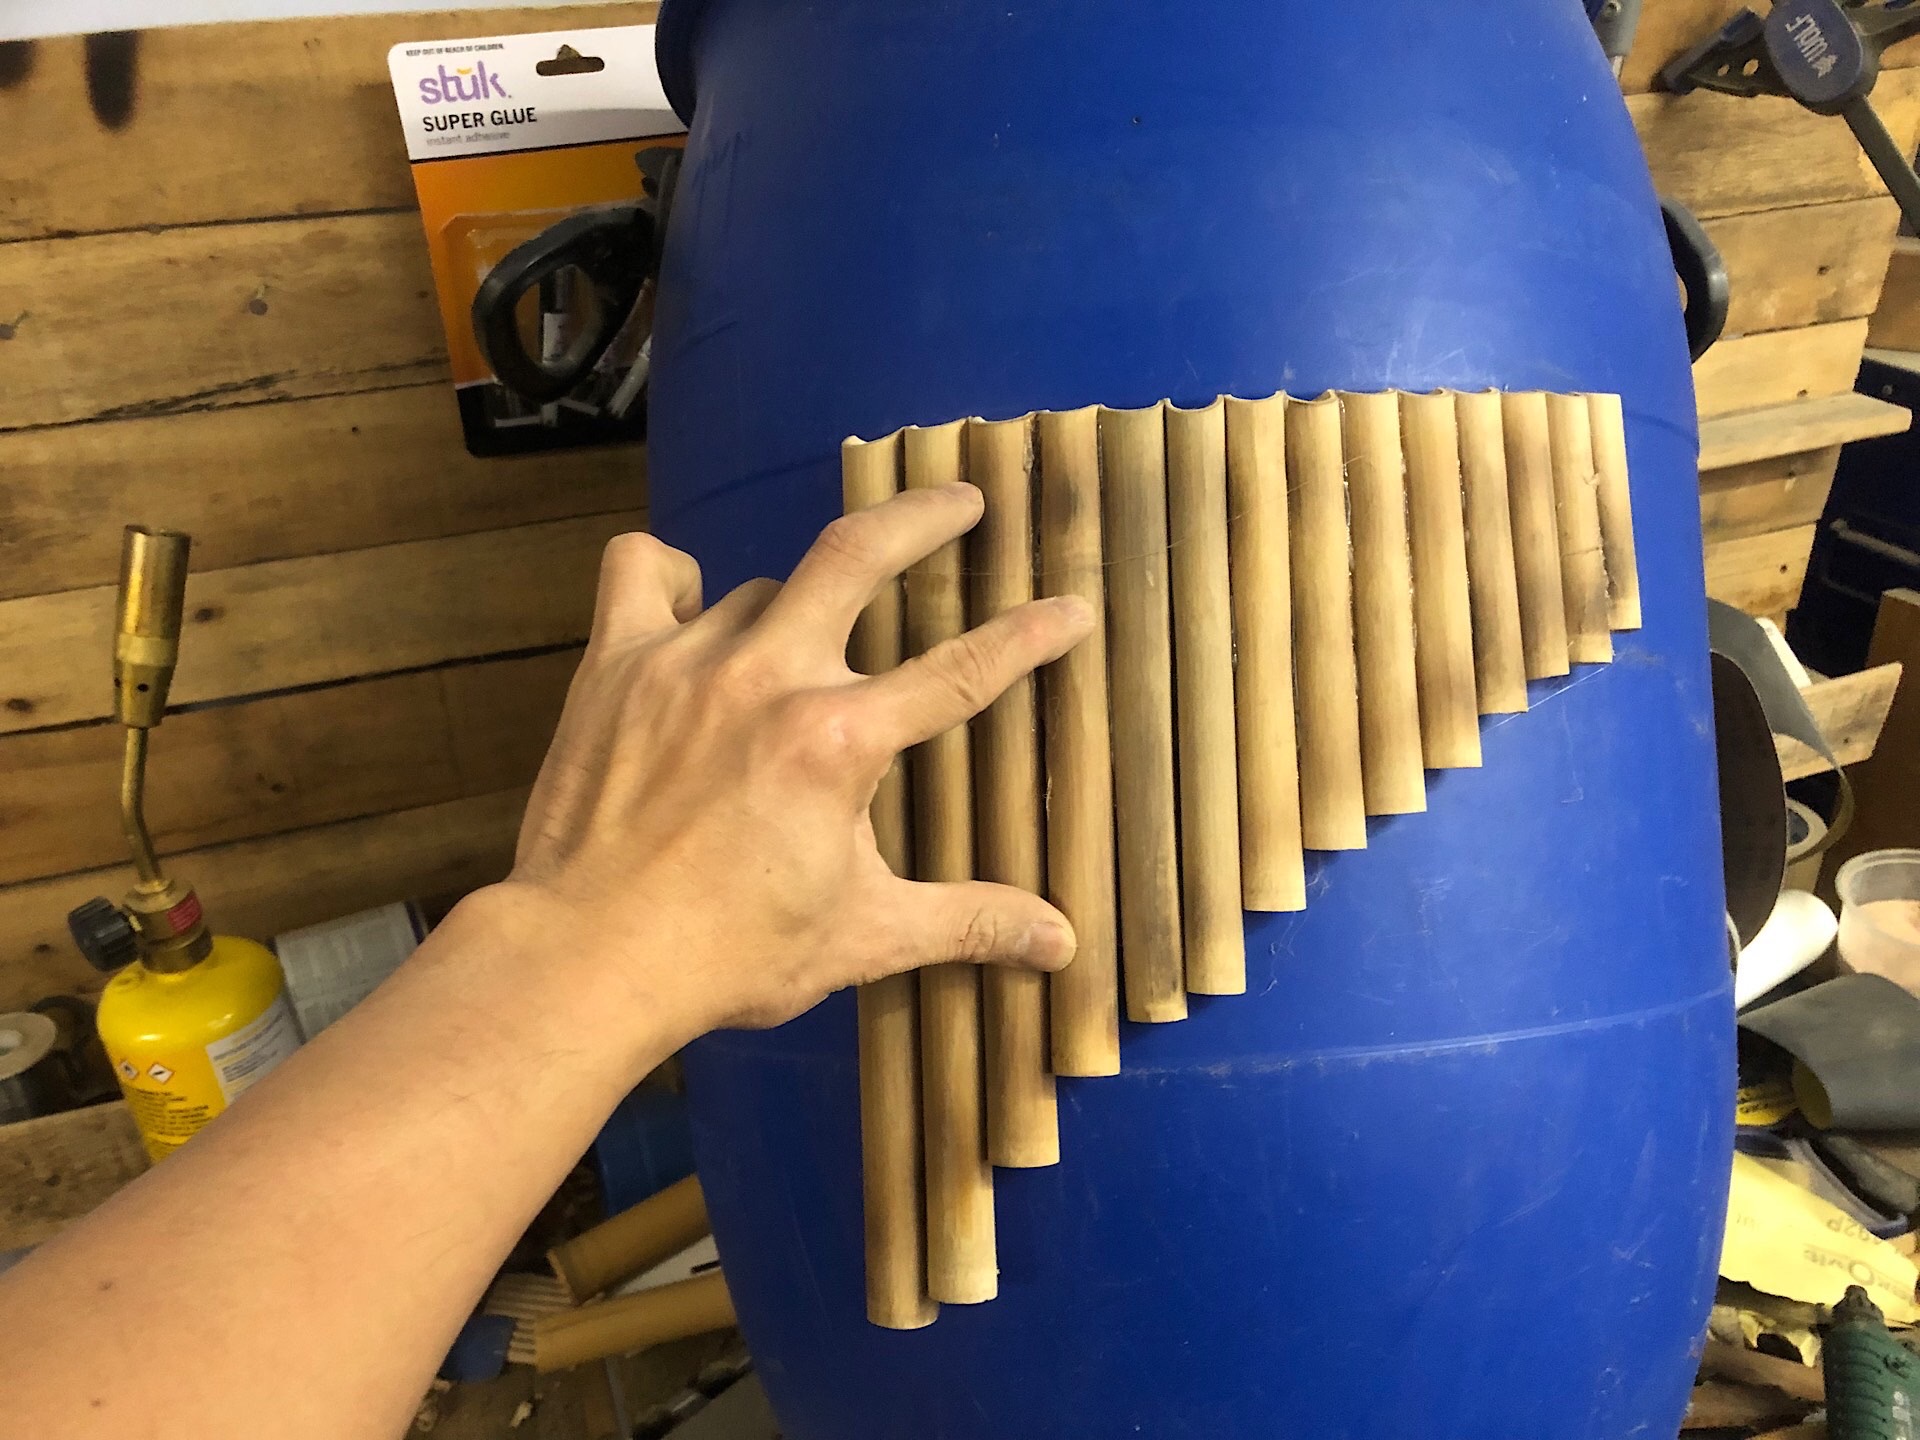 Making a pan flute with bamboo using a plastic barrel